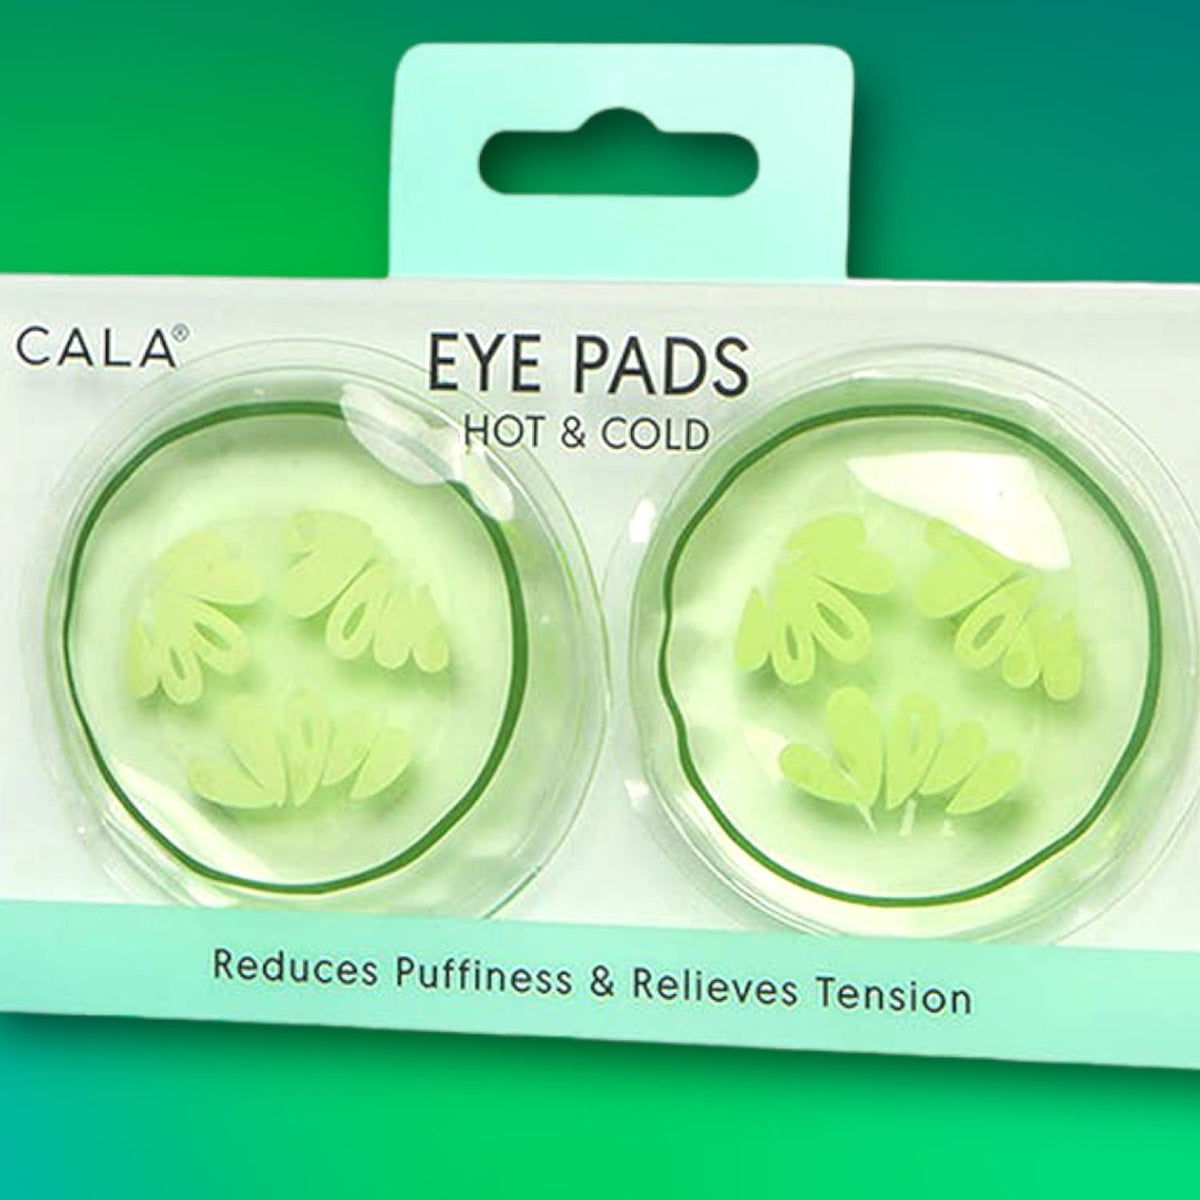 Cala Hot & Cold Eye Pads - Cucumber Slice Face - Care -